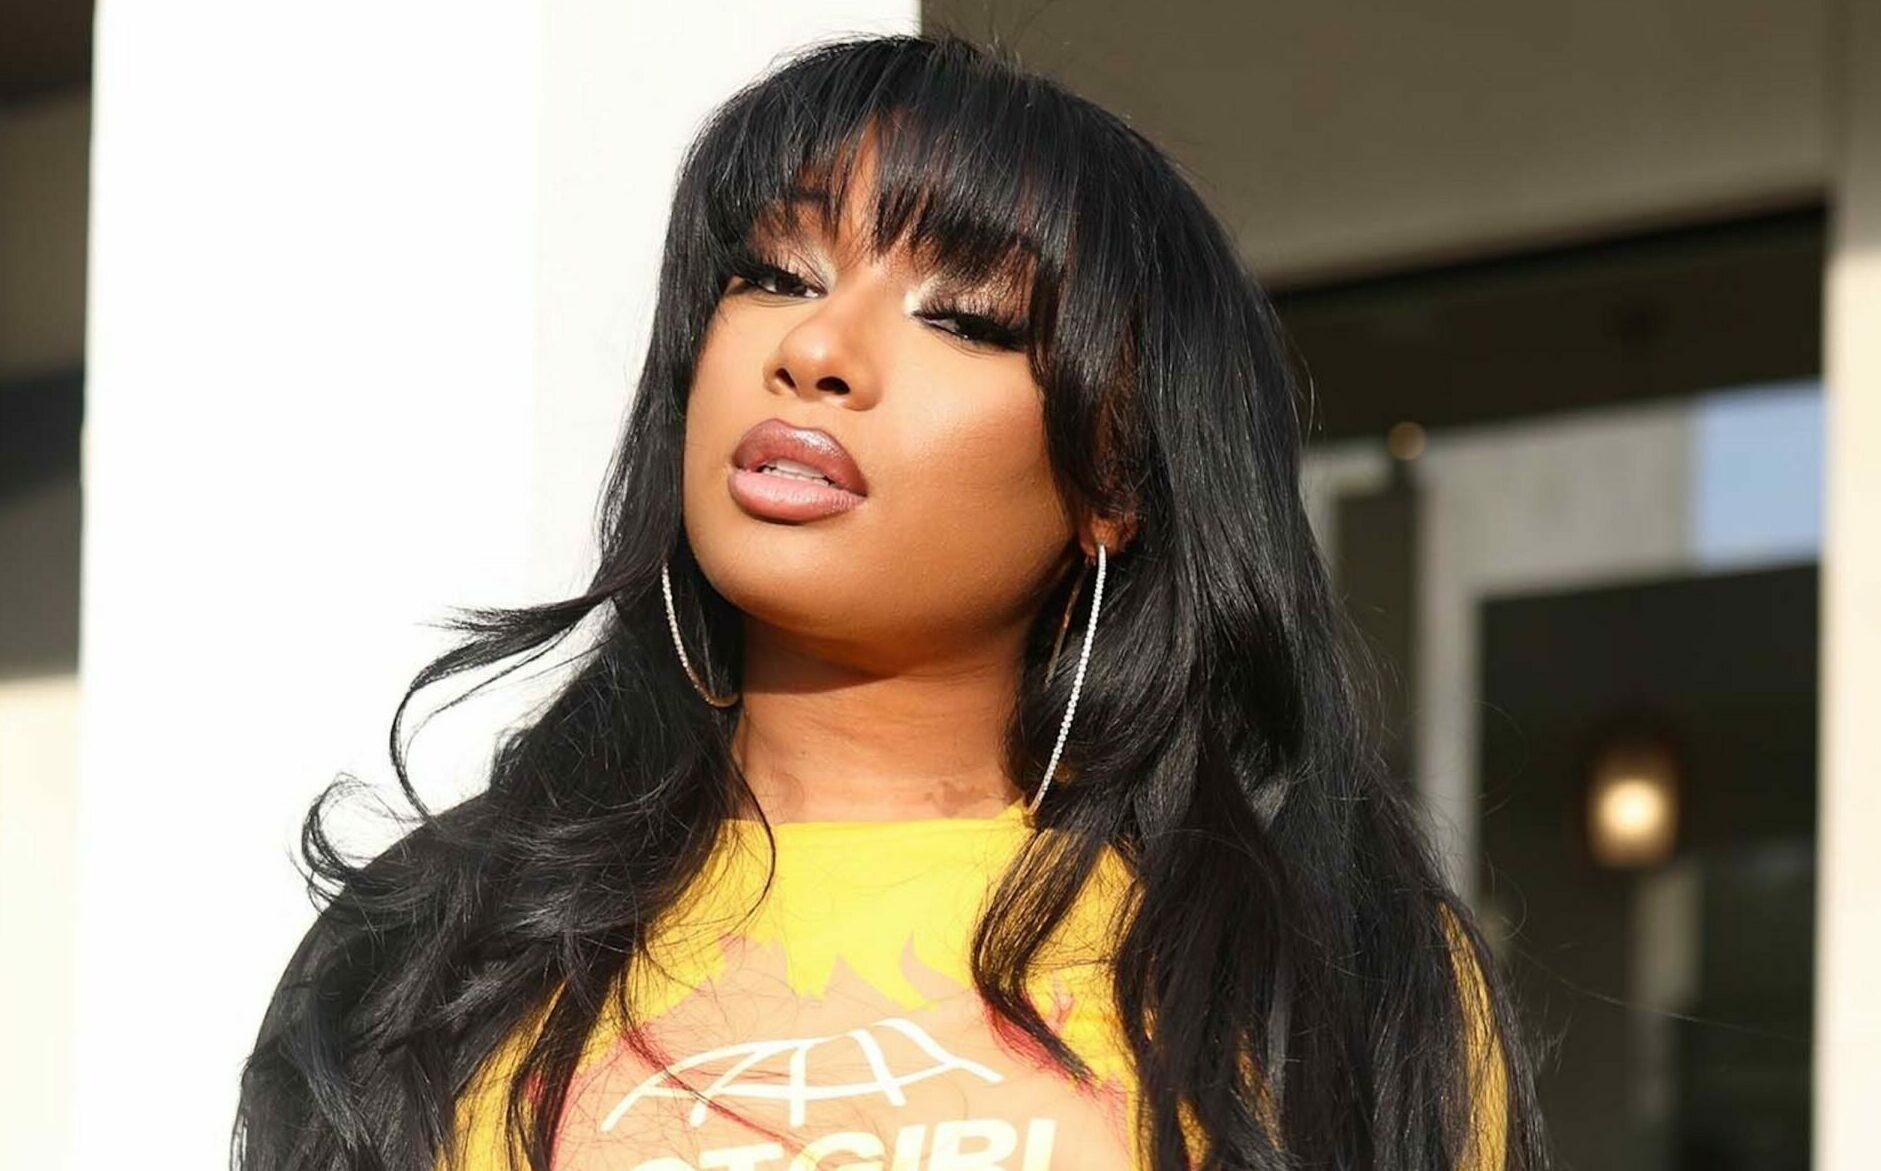 Megan Thee Stallion shows she apos s a apos Hot Girl apos - as she launches new clothing line